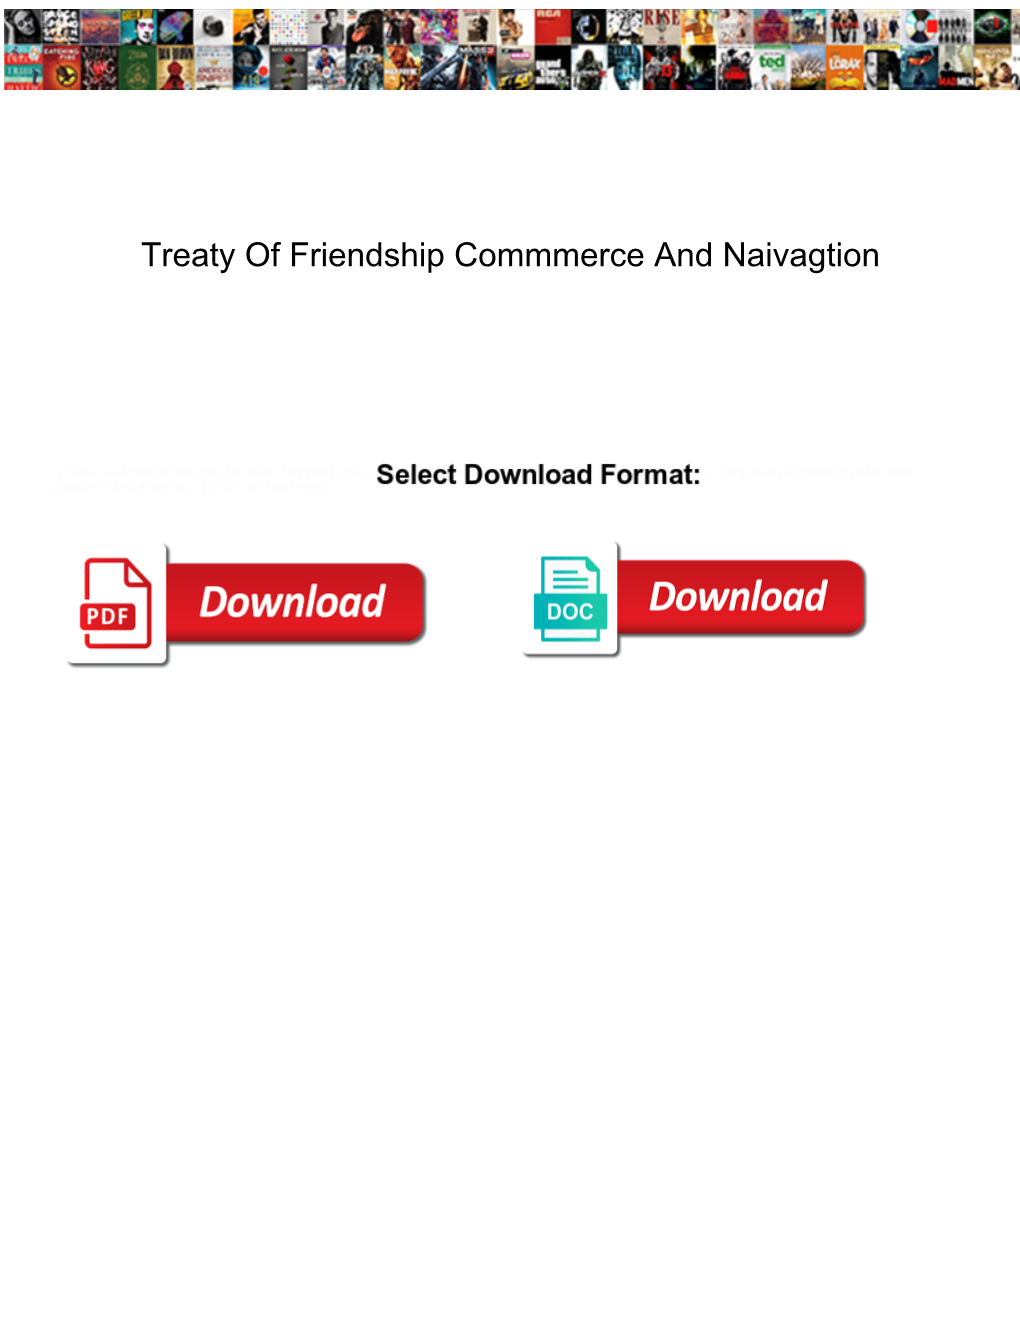 Treaty of Friendship Commmerce and Naivagtion